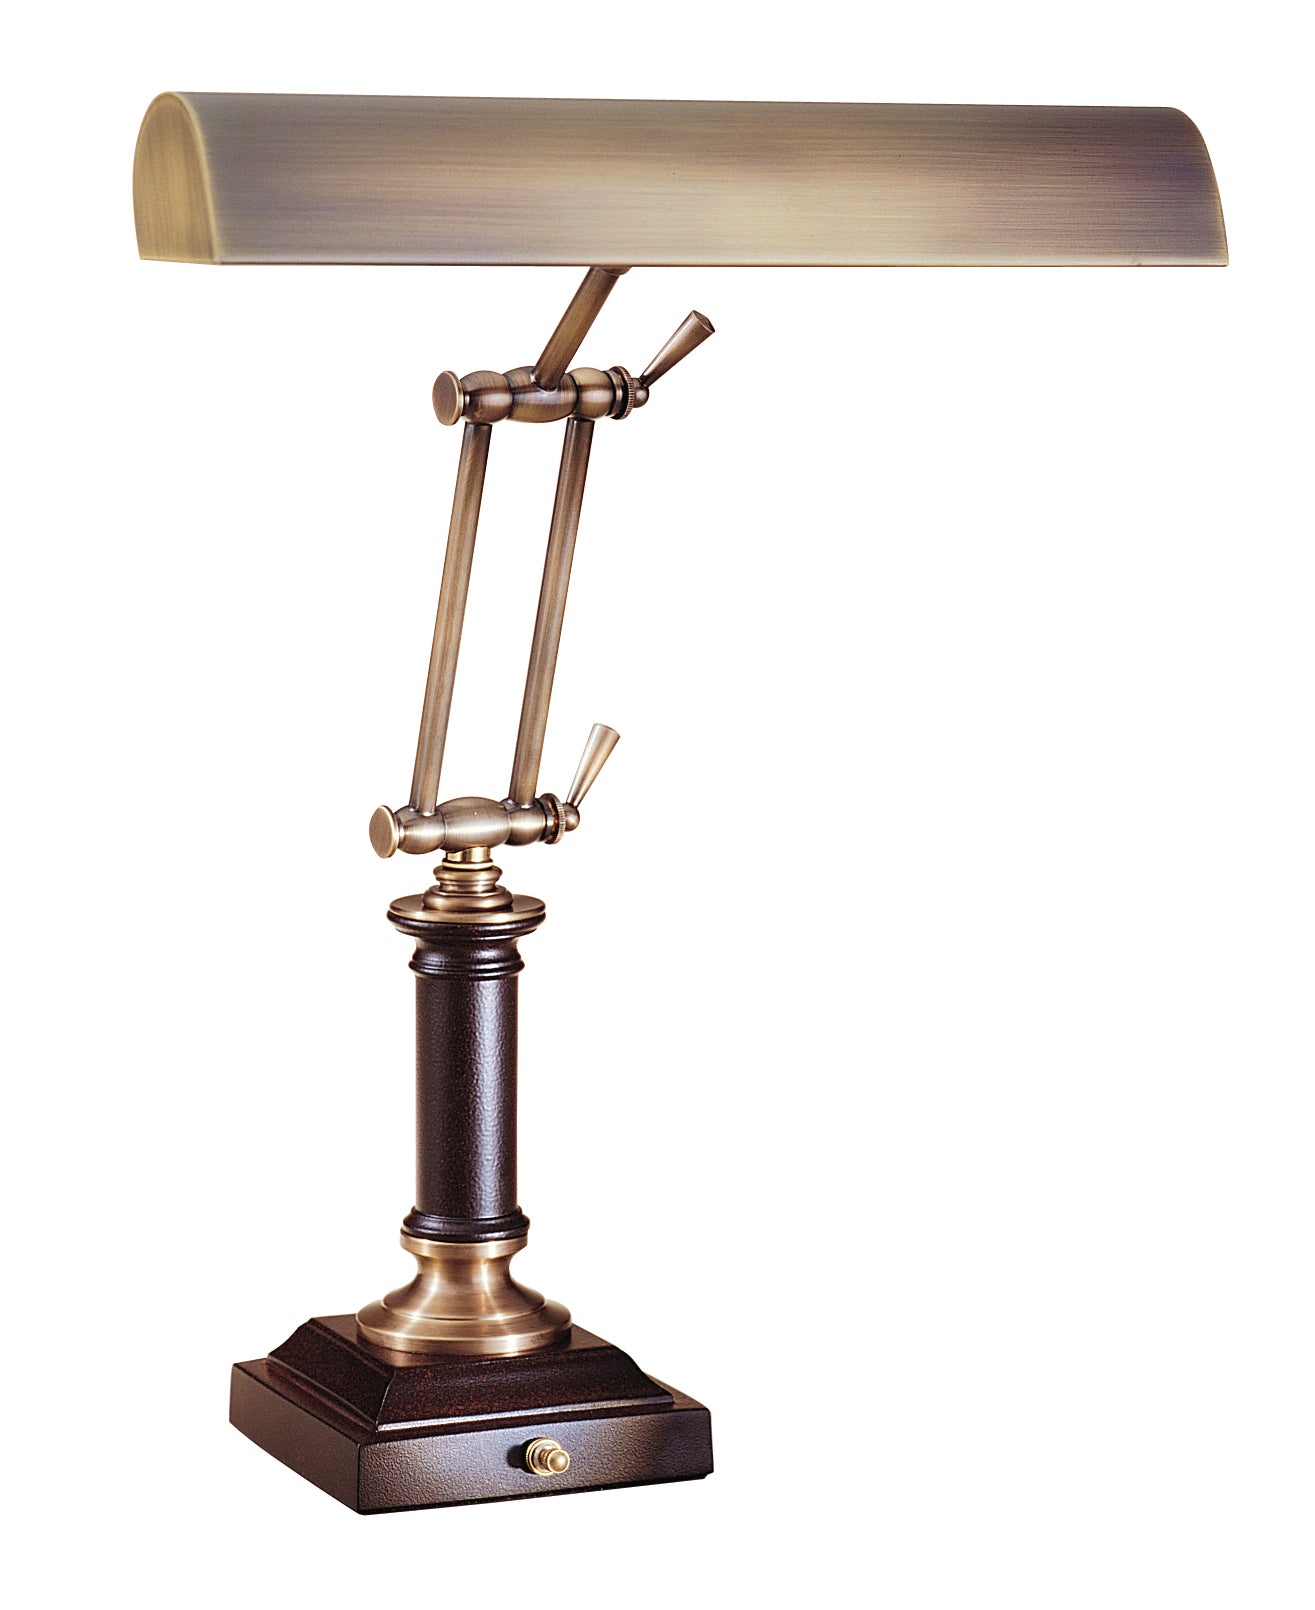 House of Troy Desk/Piano Lamp 14" Antique Brass with Cordovan Accents P14-233-C71